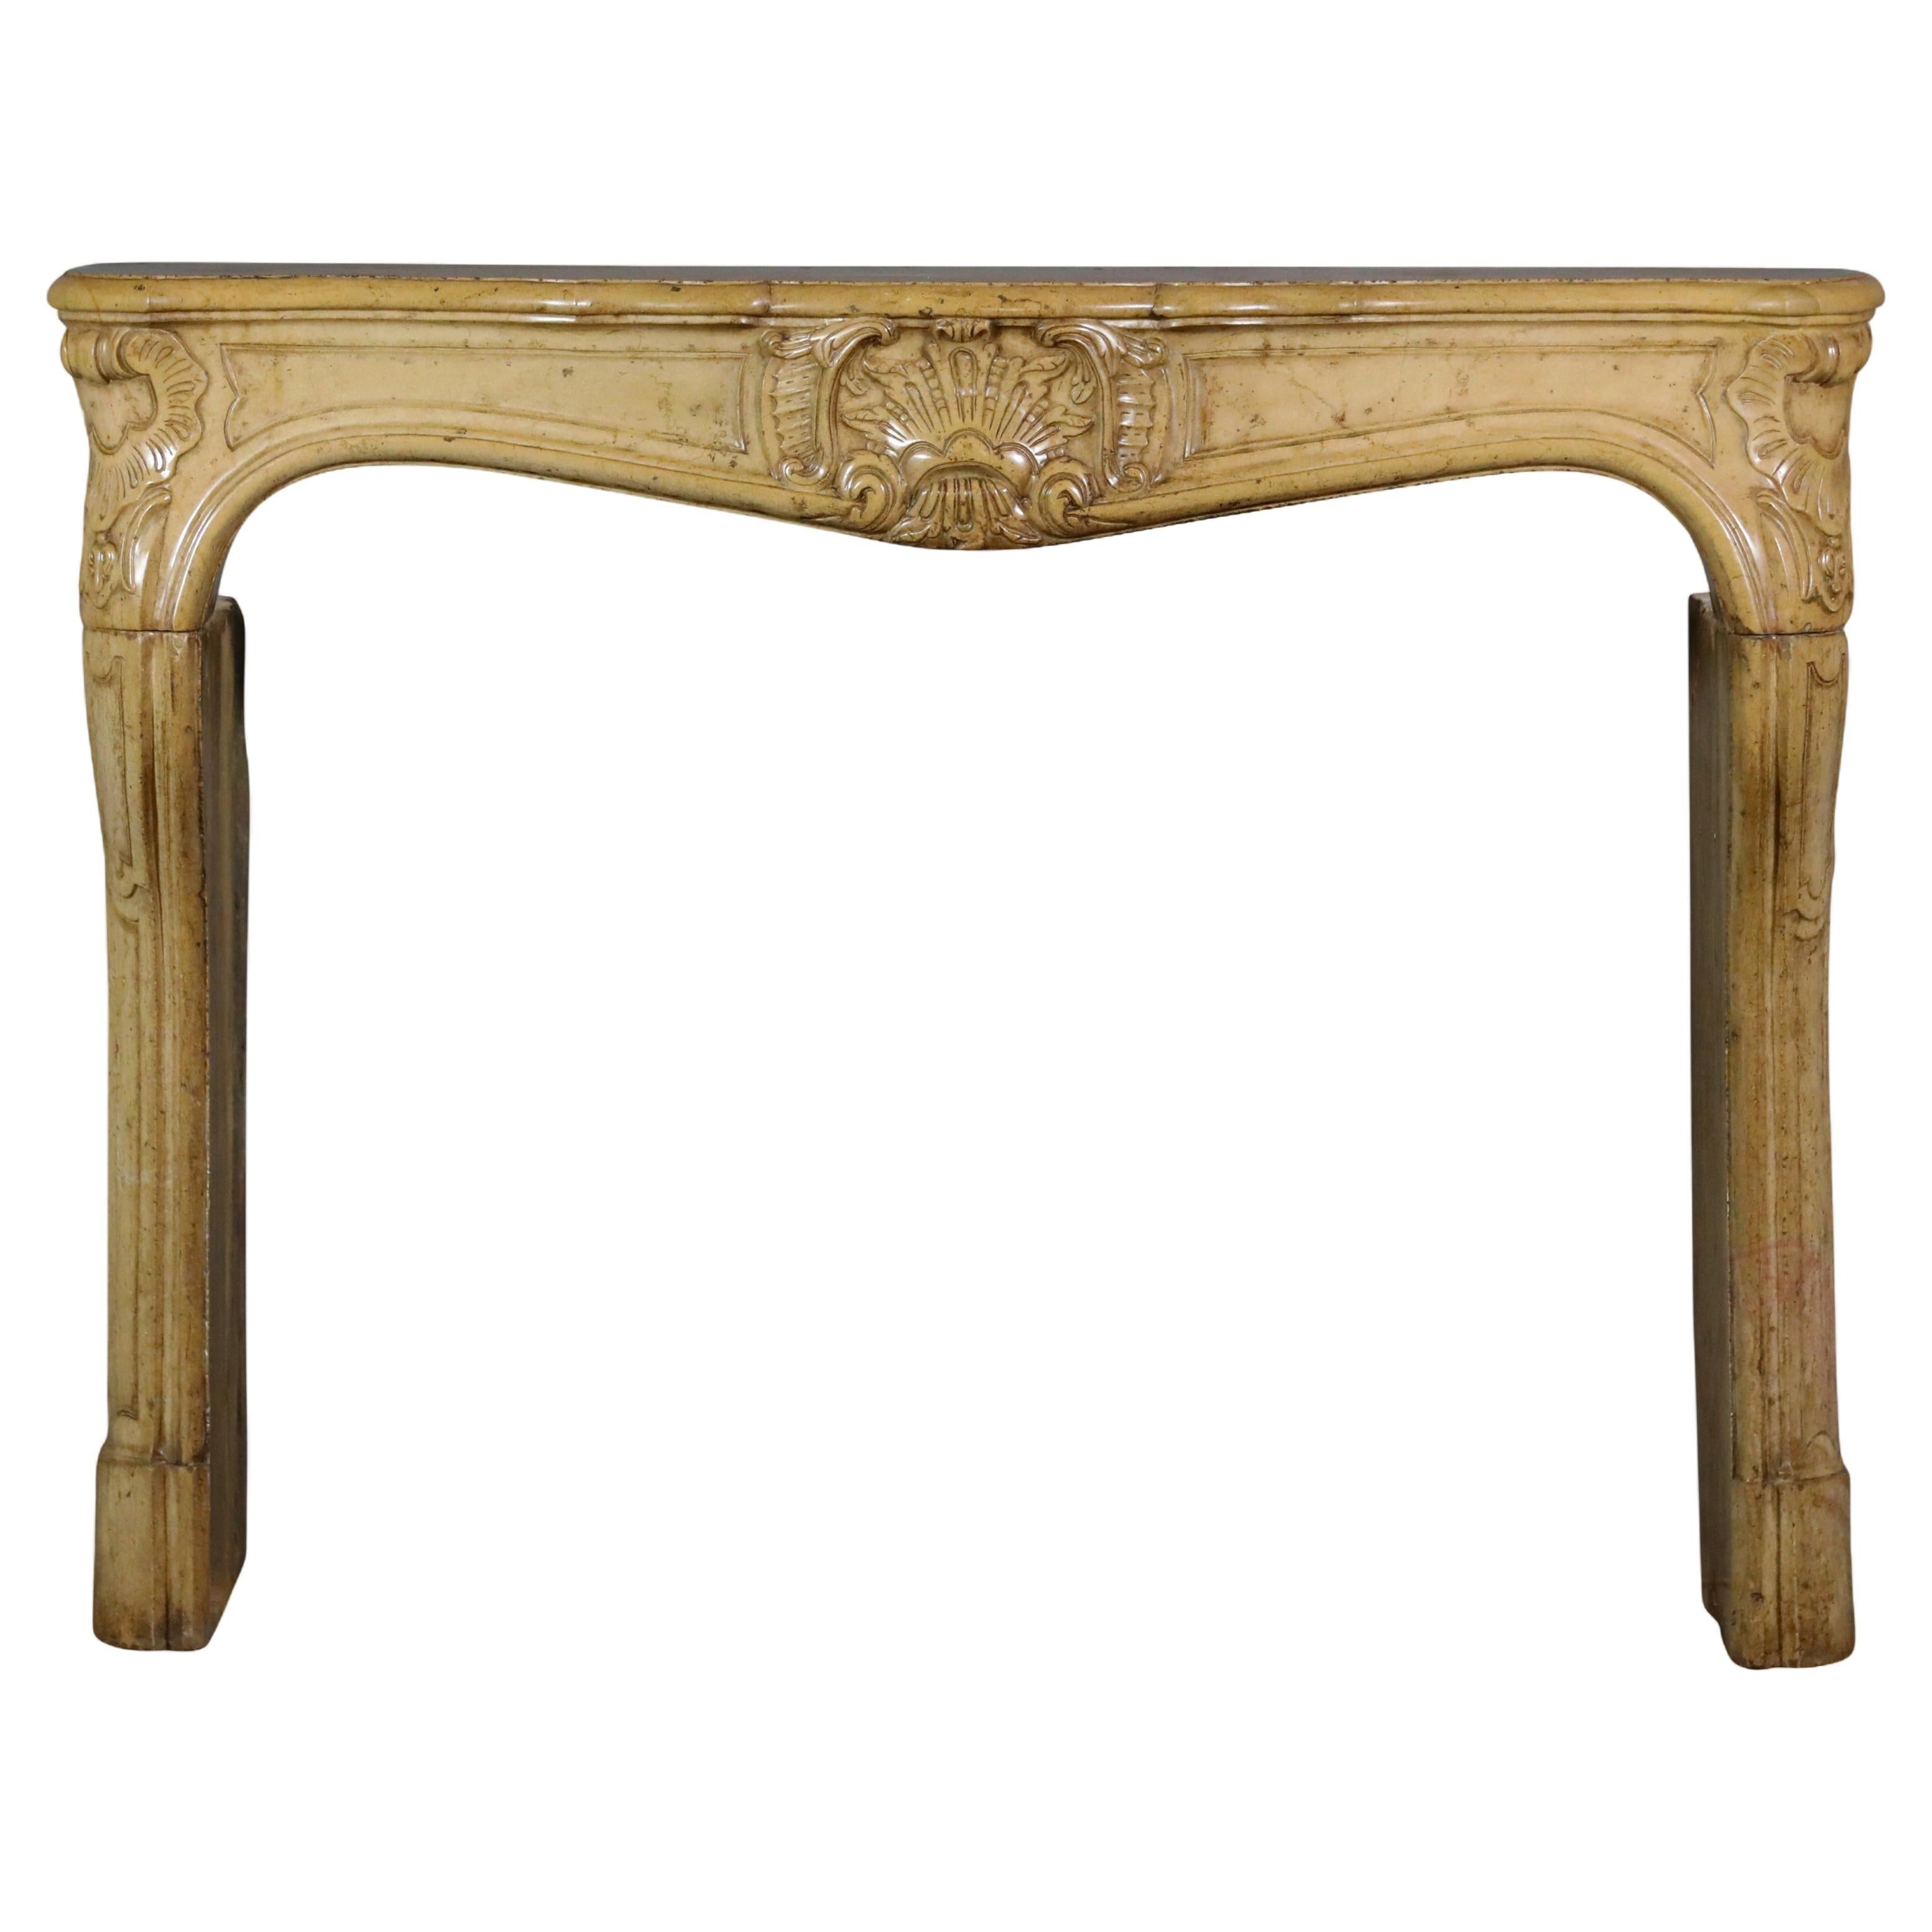 Classic Regency Fireplace Surround In French Honey Color Hard Stone 18th Century For Sale